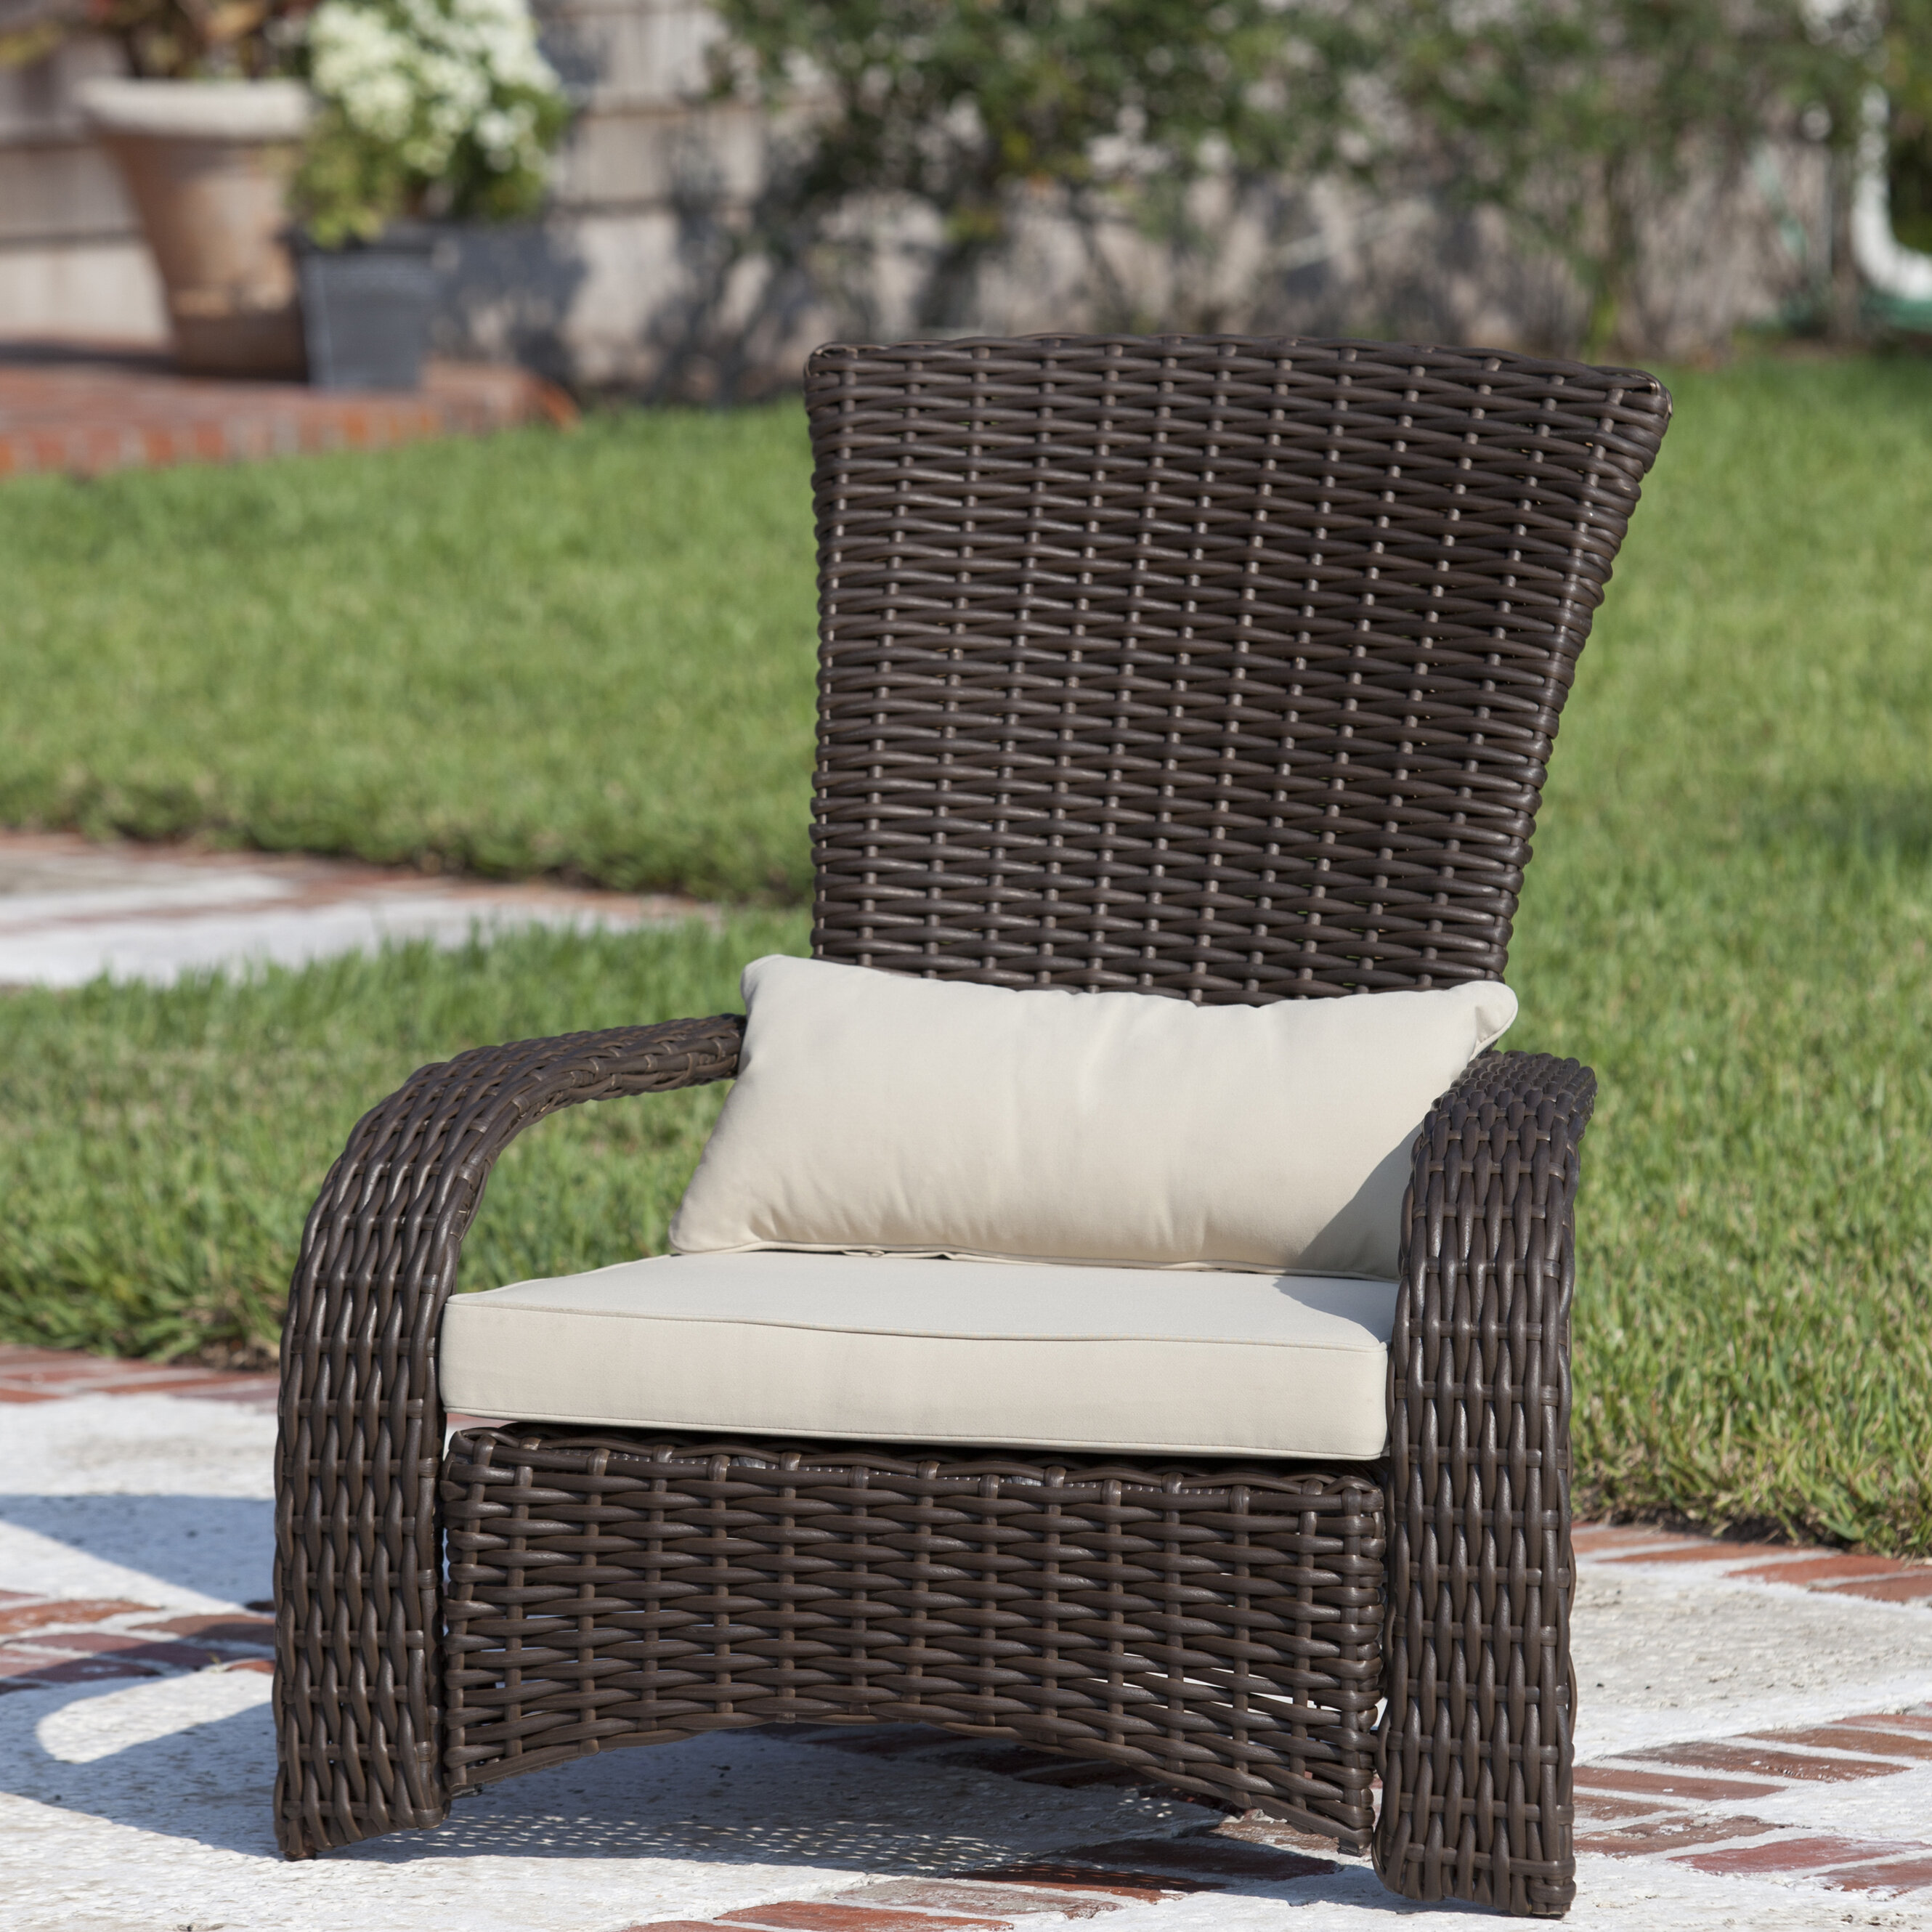 Outdoor Coconino Wicker Chair w/ Cushion Pillow PE Rattan Patio Dining Chair 